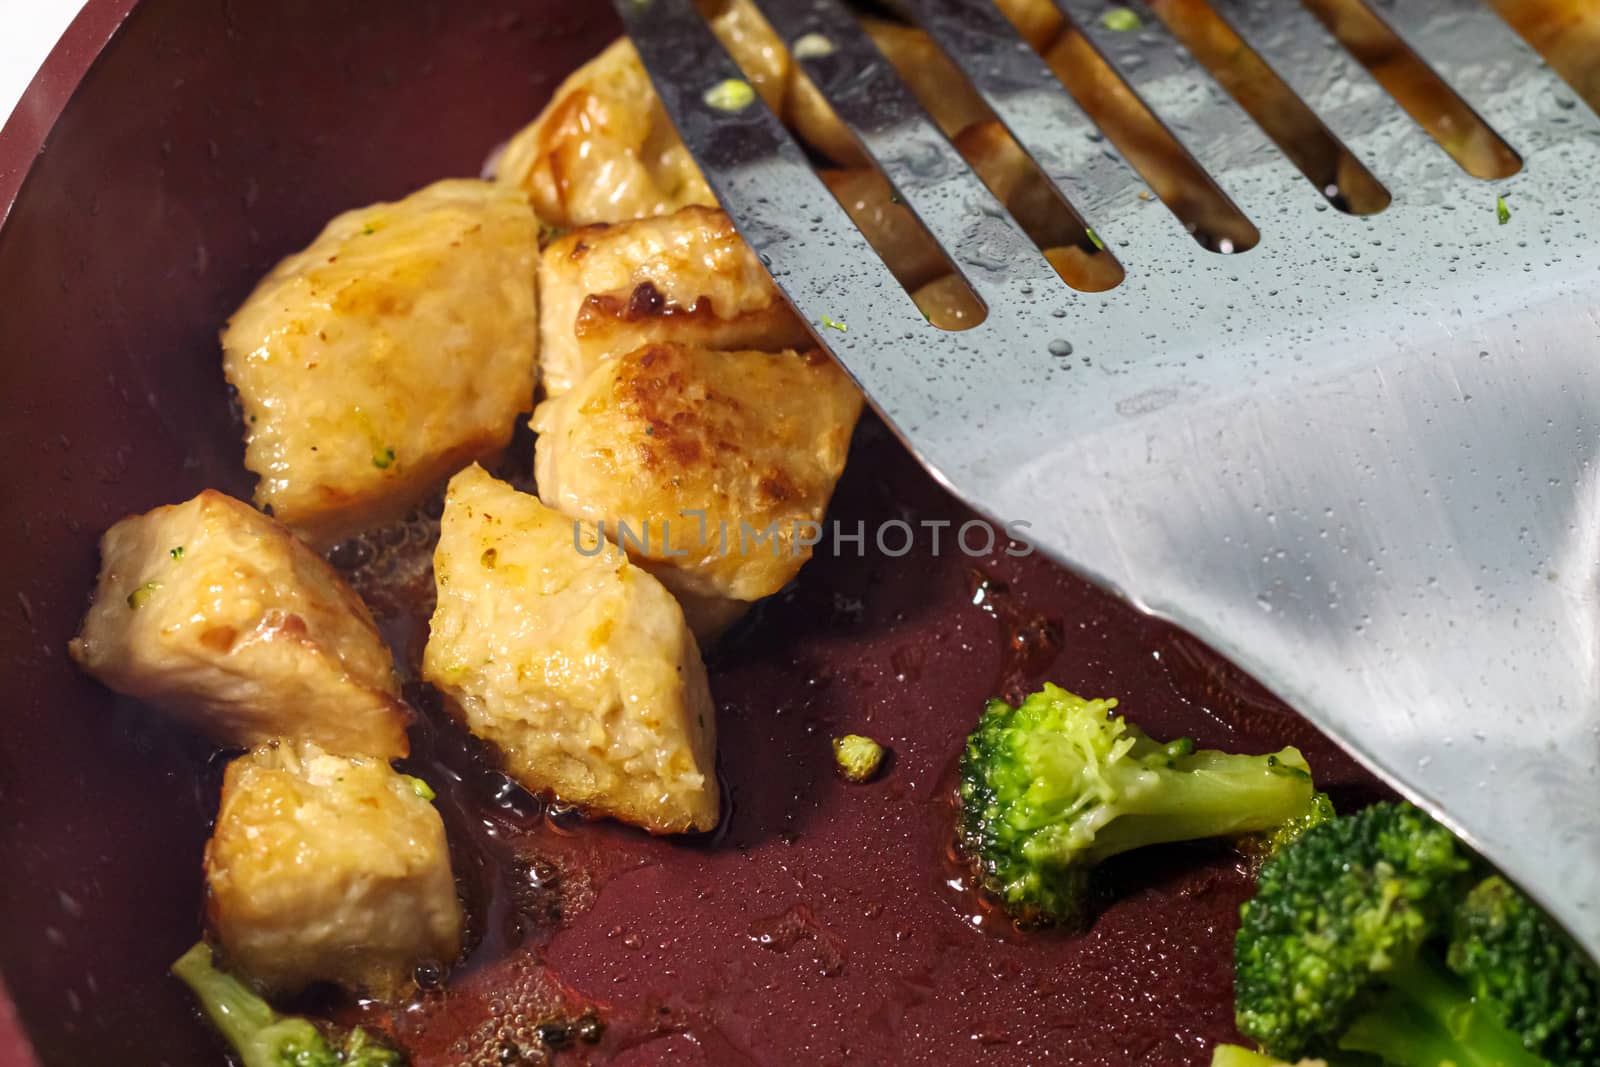 In a frying pan, vegetarian simulated chicken and fresh broccoli are being cooked. A close-up view shows the detail in the food, bubbling oils on the pan, and the metal spatula flipper leaning across the top.